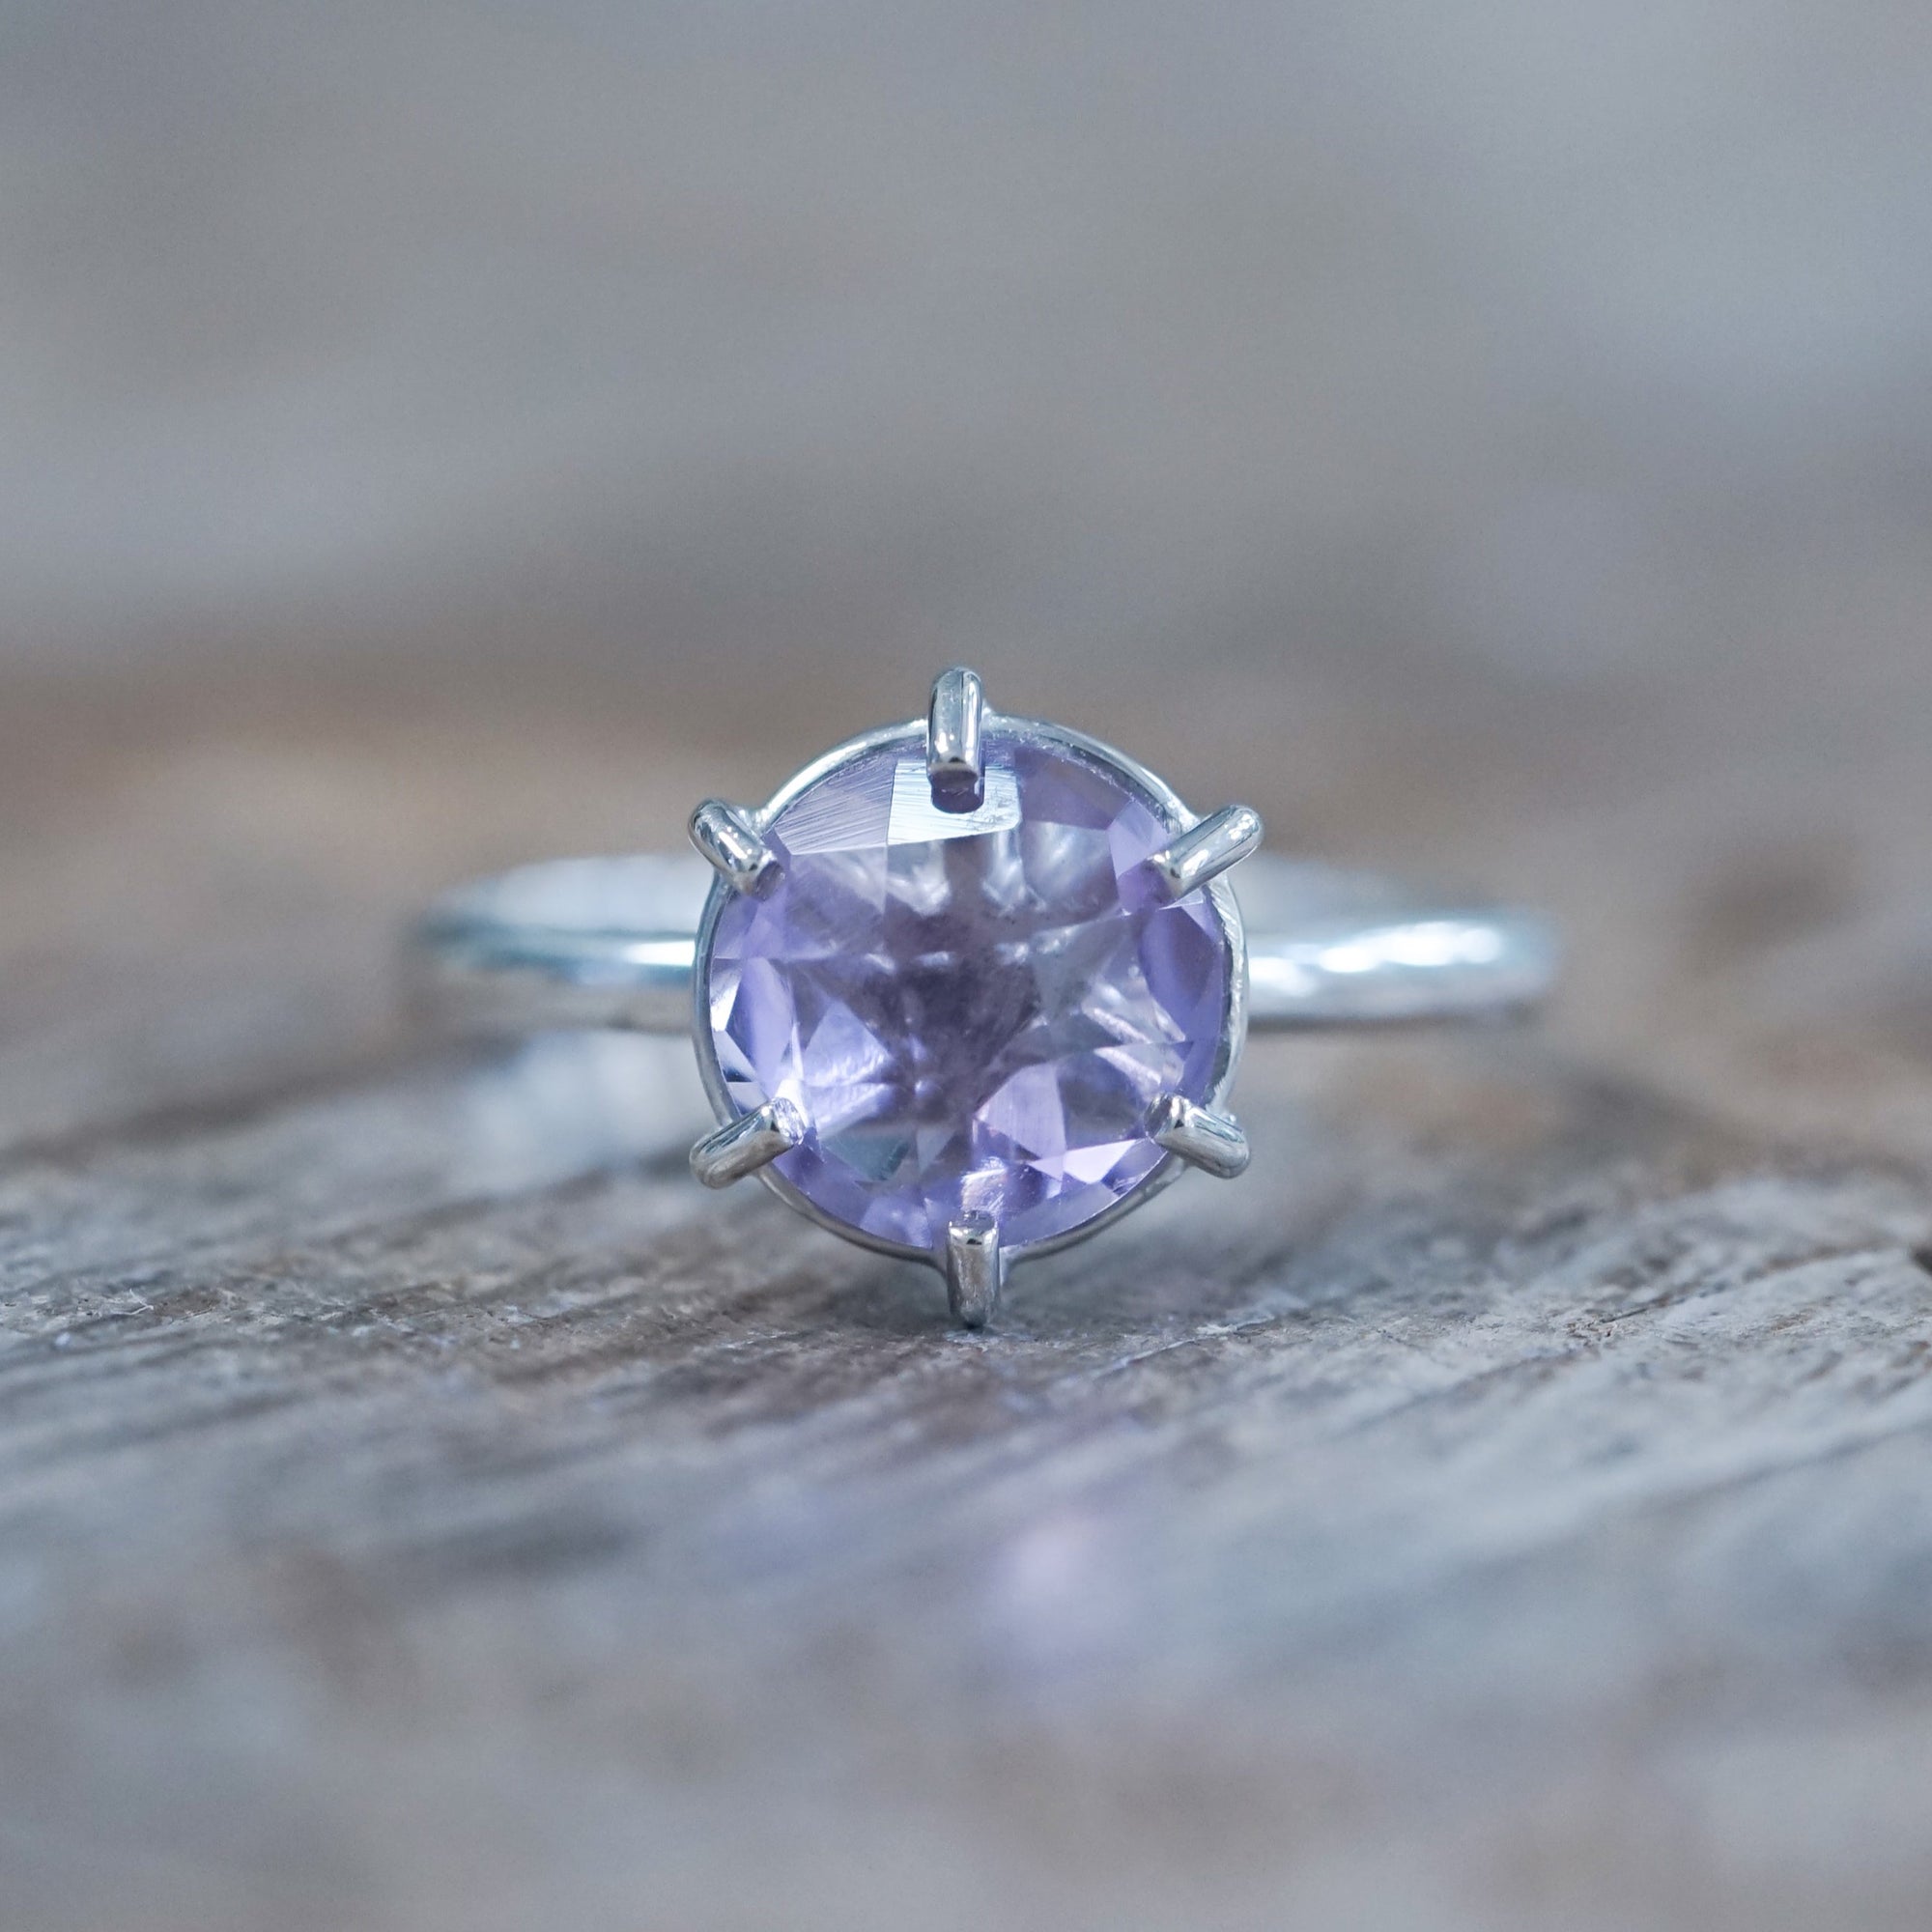 Checkered Amethyst Ring - Gardens of the Sun | Ethical Jewelry